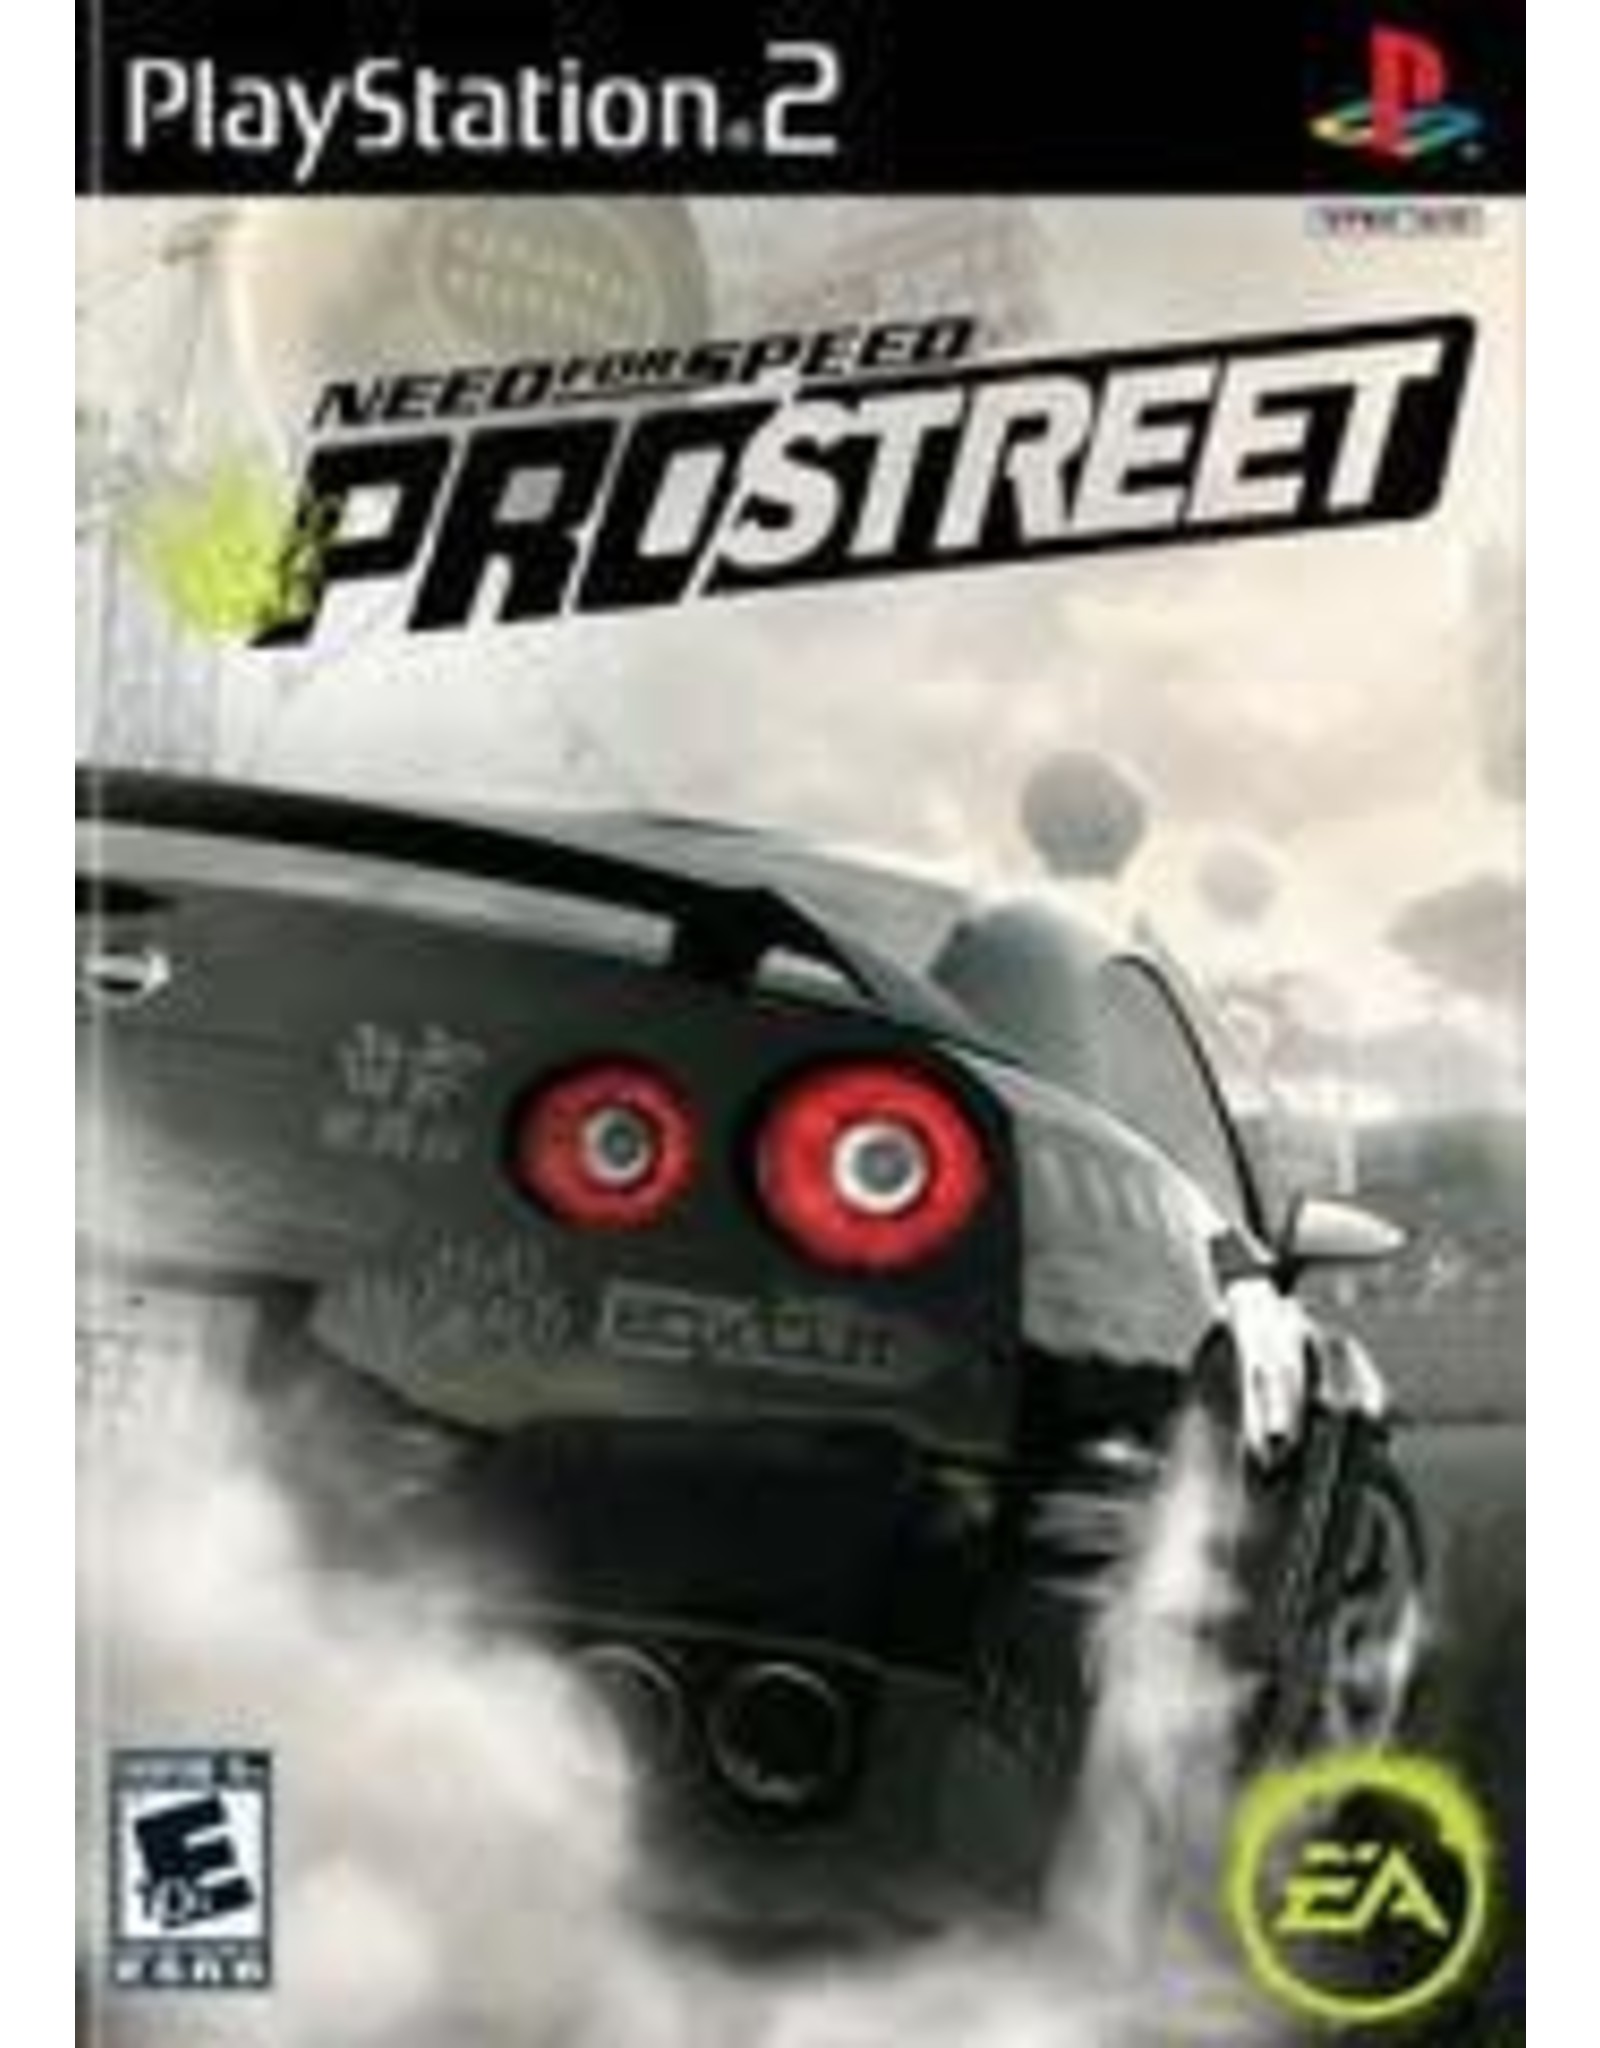 Playstation 2 Need for Speed Prostreet (No Manual)